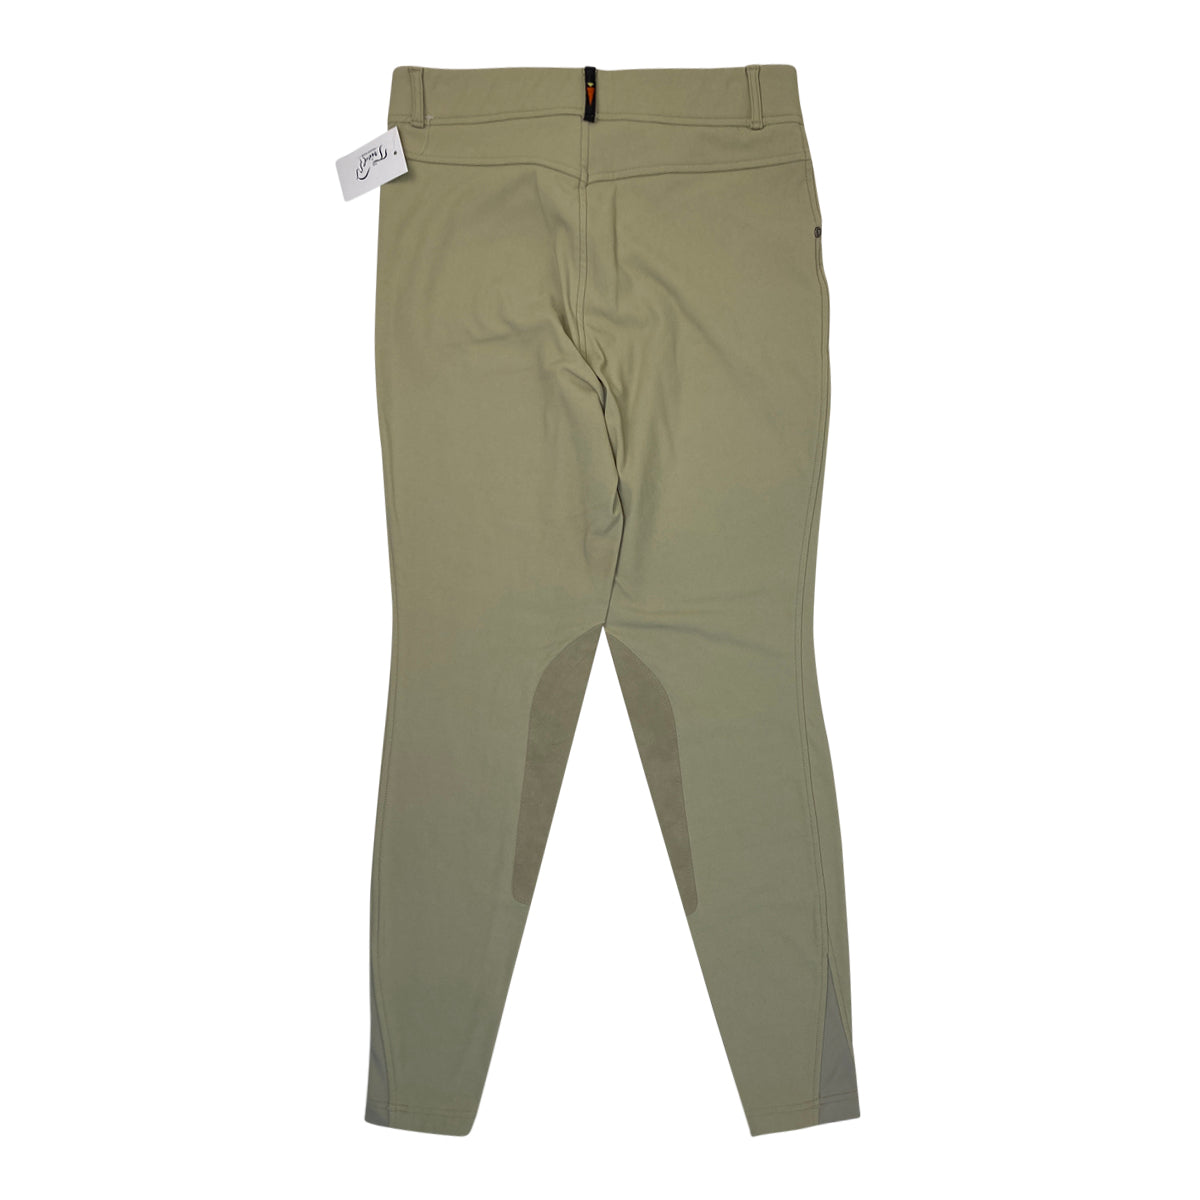 Kerrits 'Crossover' Knee Patch Breeches in Tan